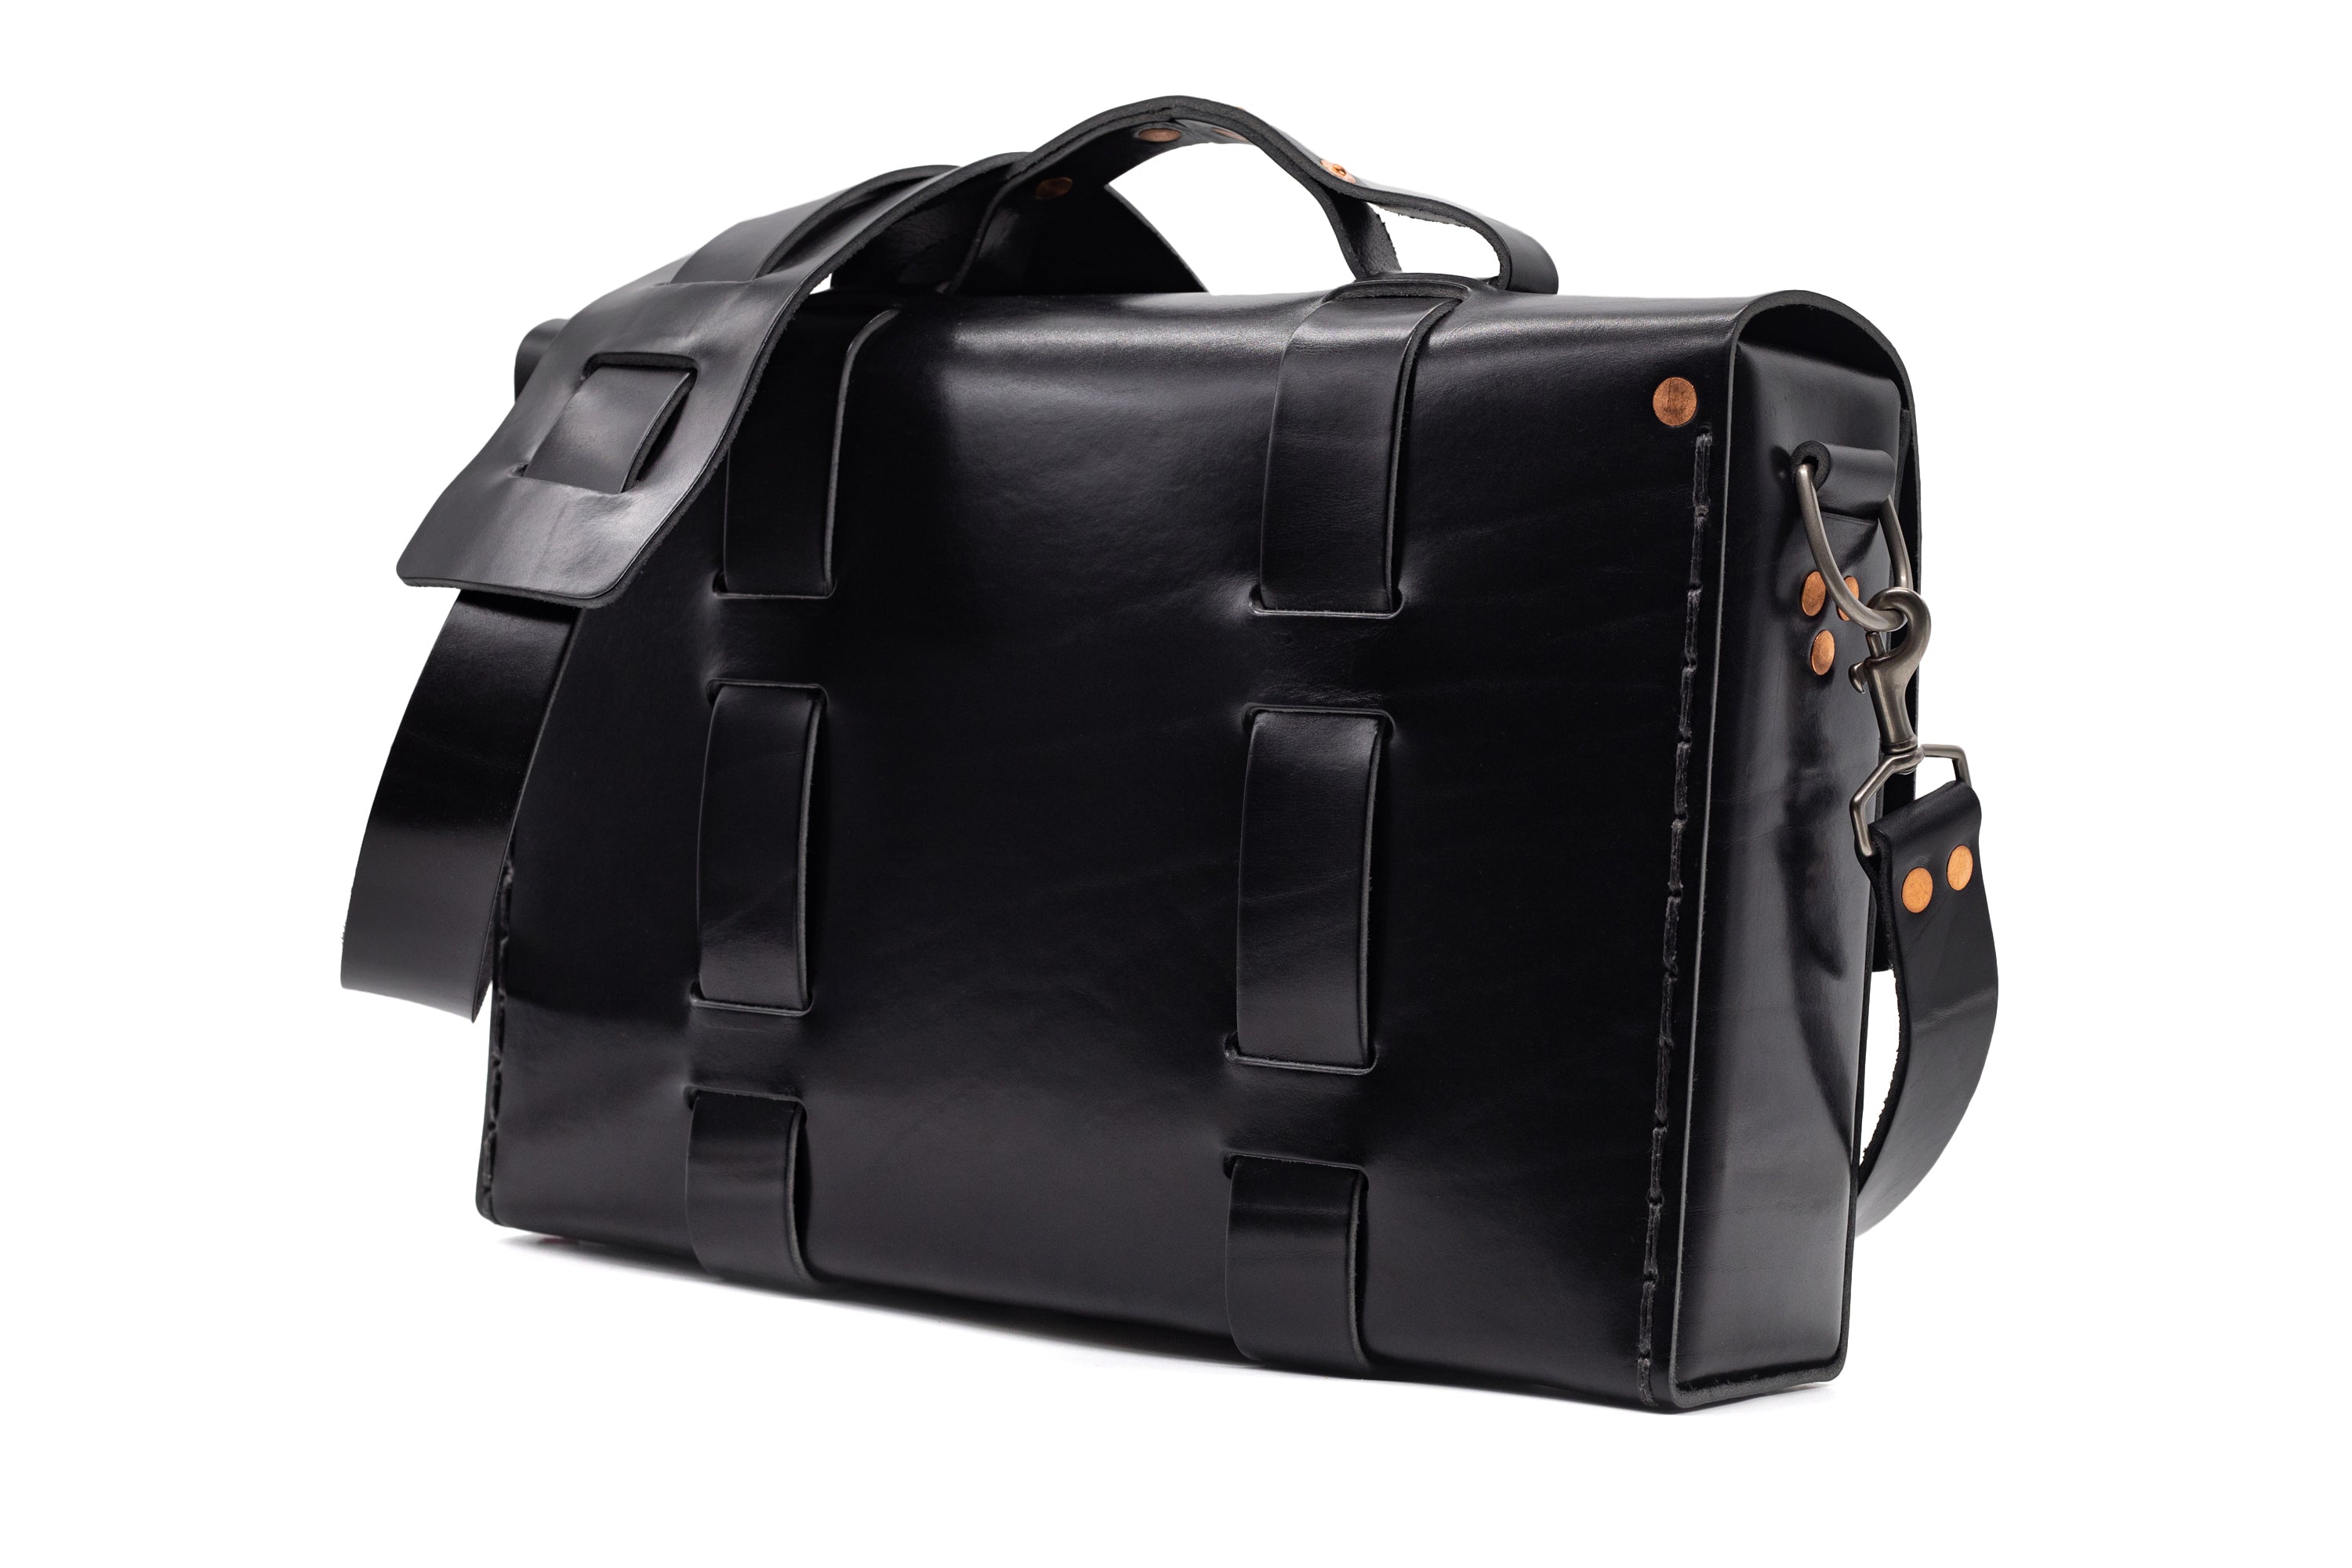 LIMITED EDITION NO. 4313 MINIMALIST STANDARD LEATHER SATCHEL IN CHESTERFIELD BLACK - ONLY 2 MADE